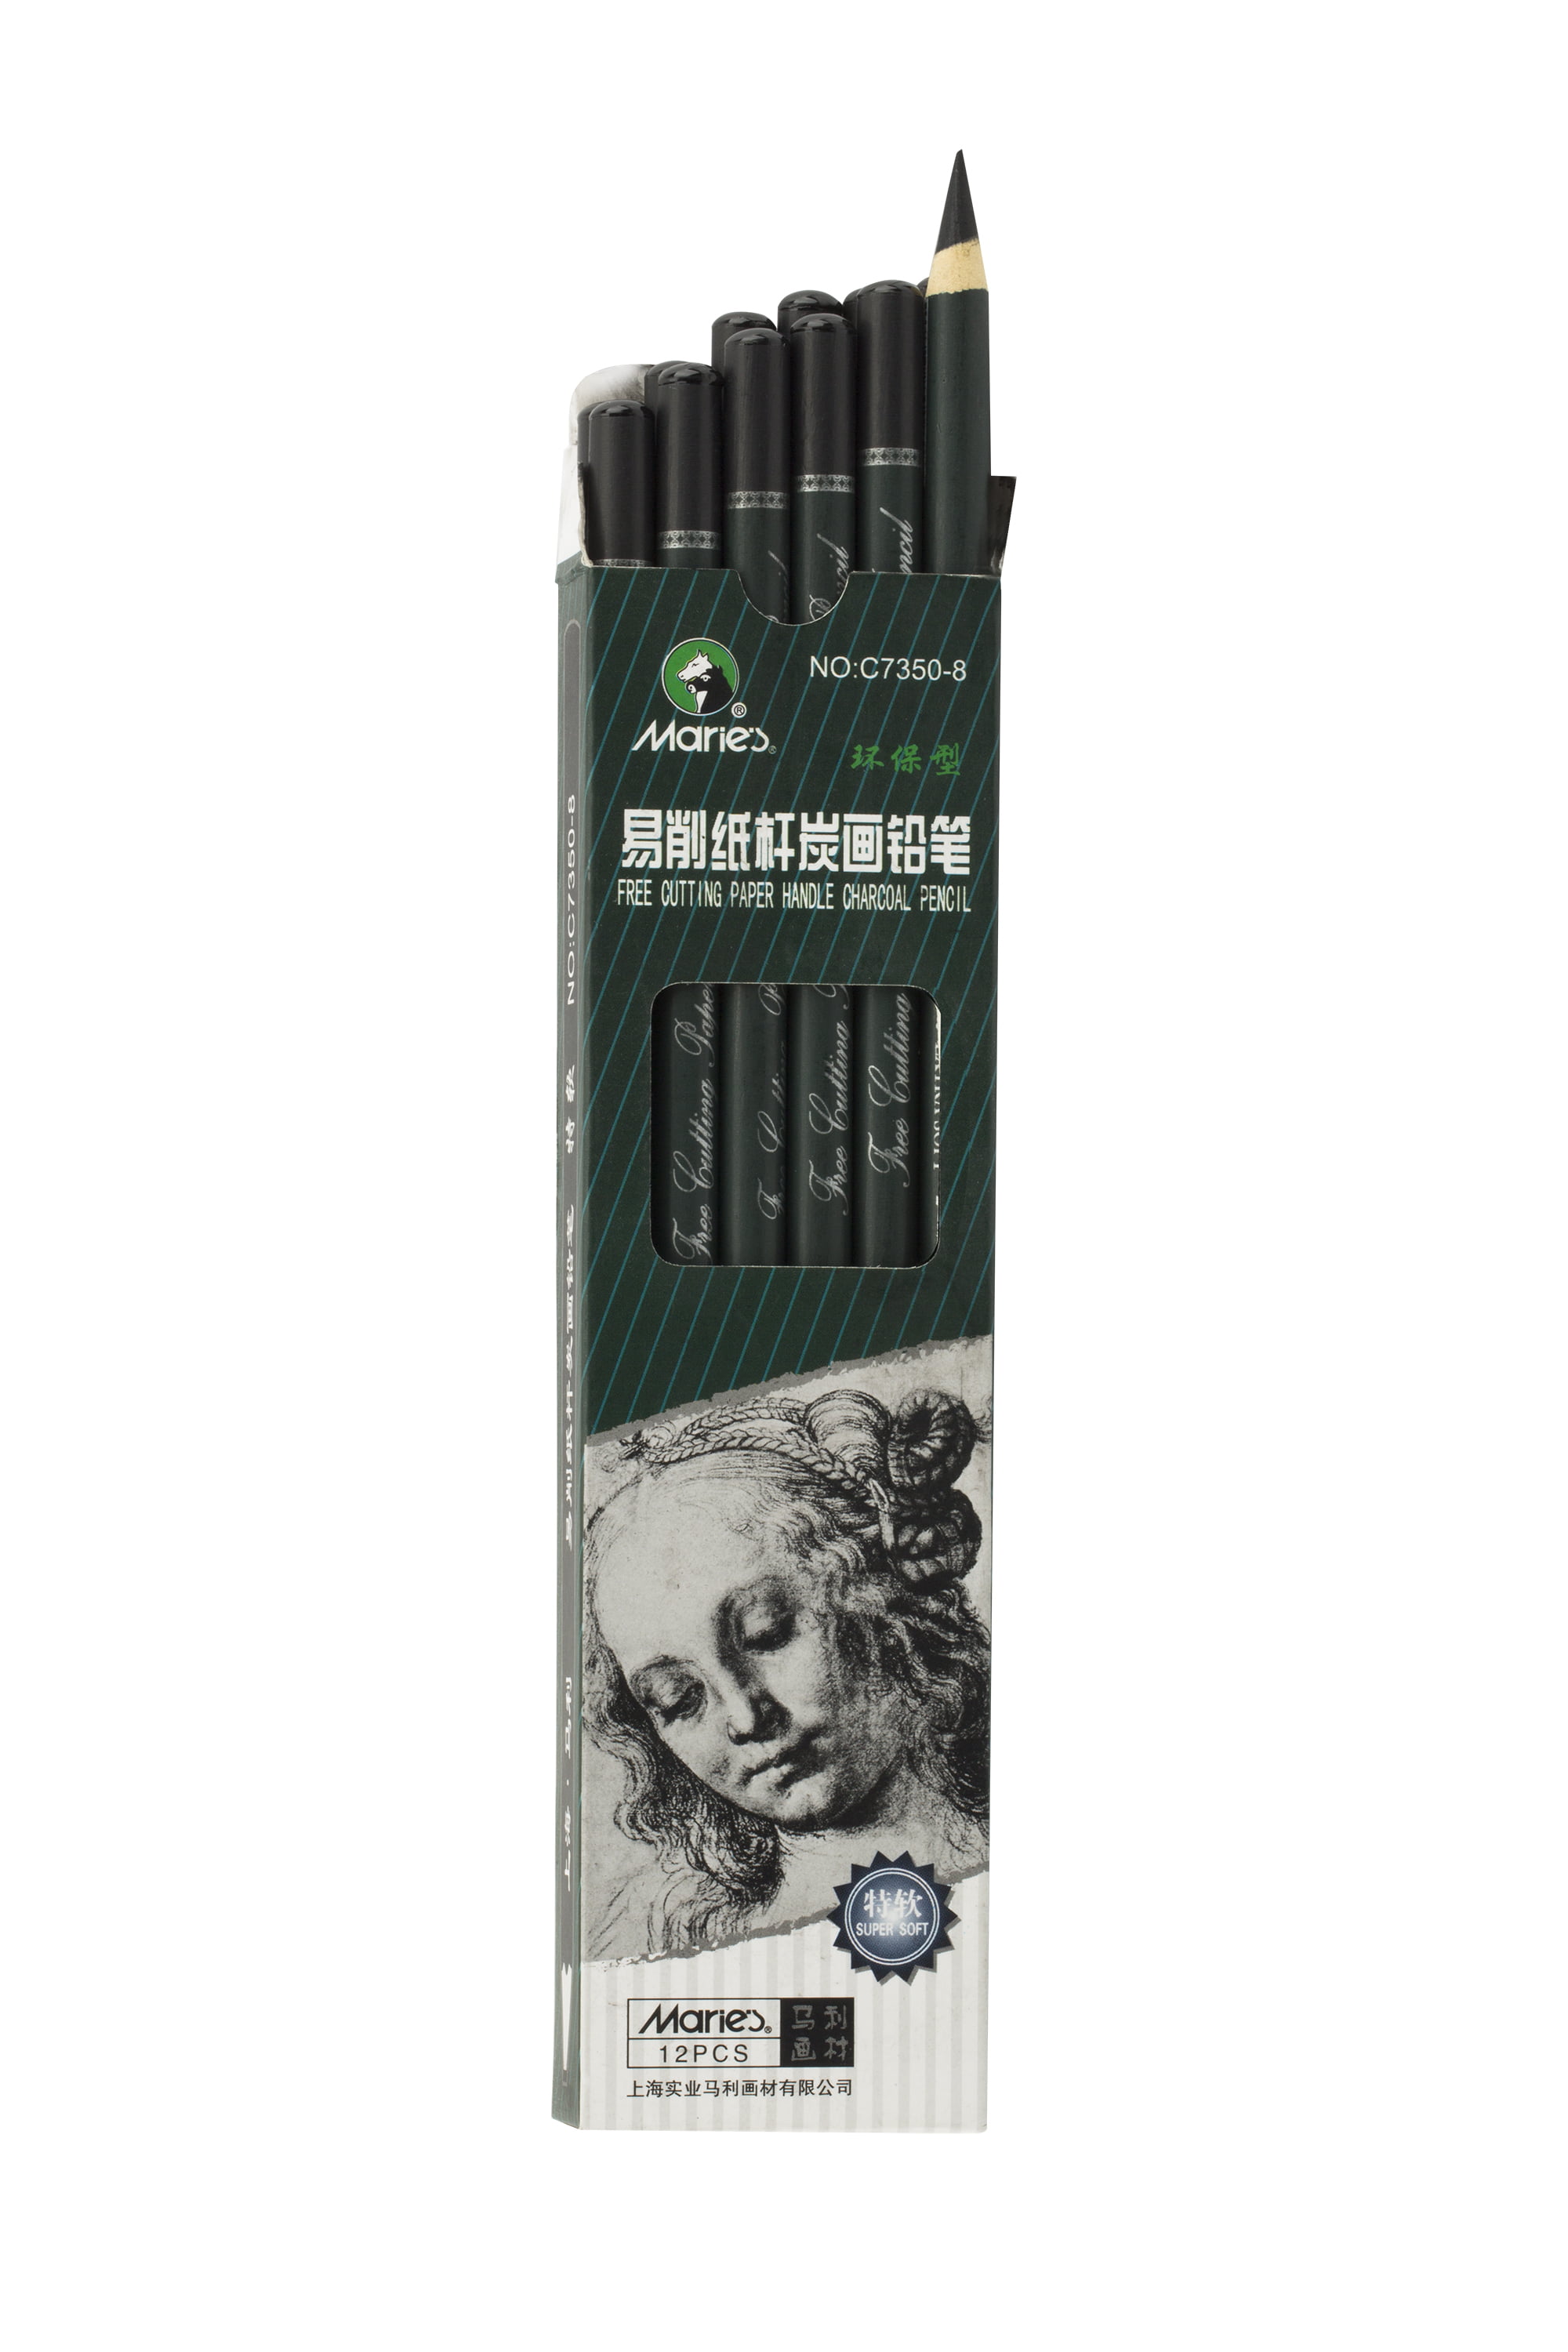 Marie's Sketch Graphite Pencil Cases Set Charcoal School Students